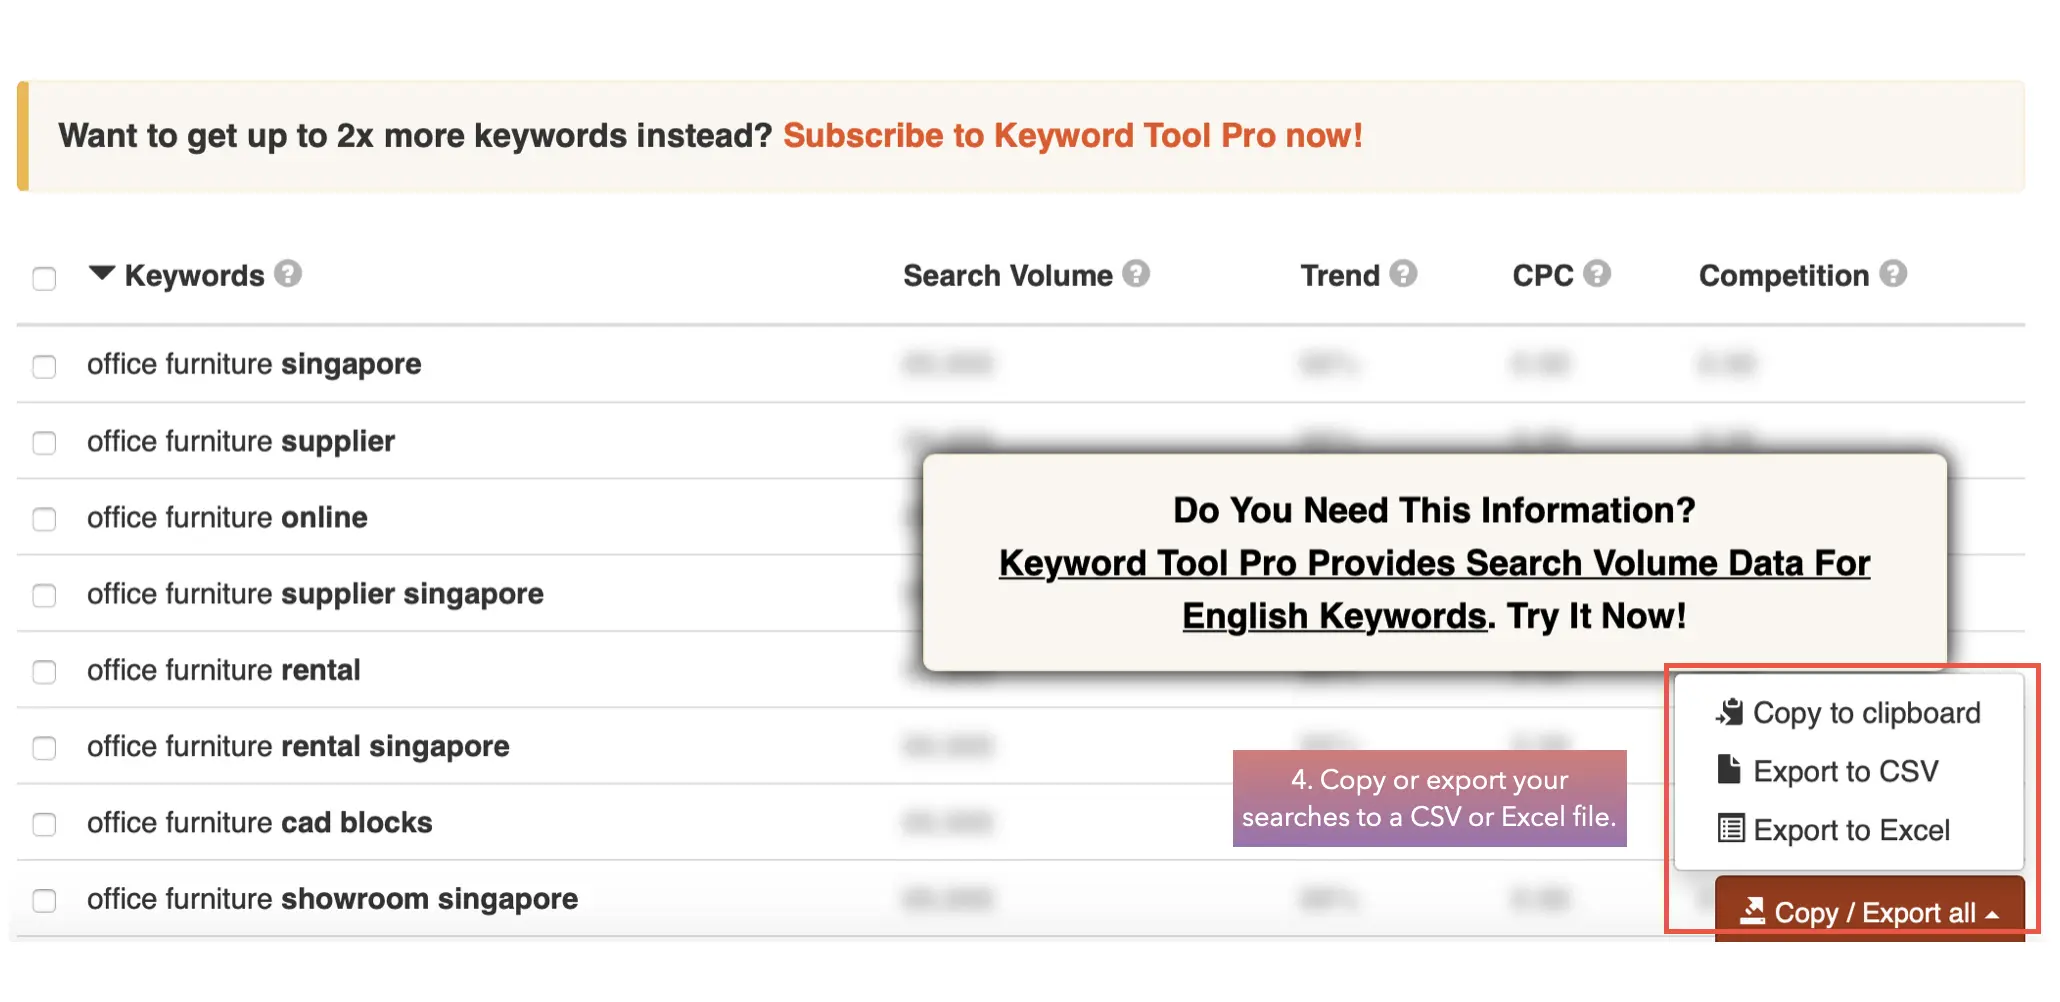 Copy-or-export-your-searches-to-a-CSV-or-Excel-file-keyword-io